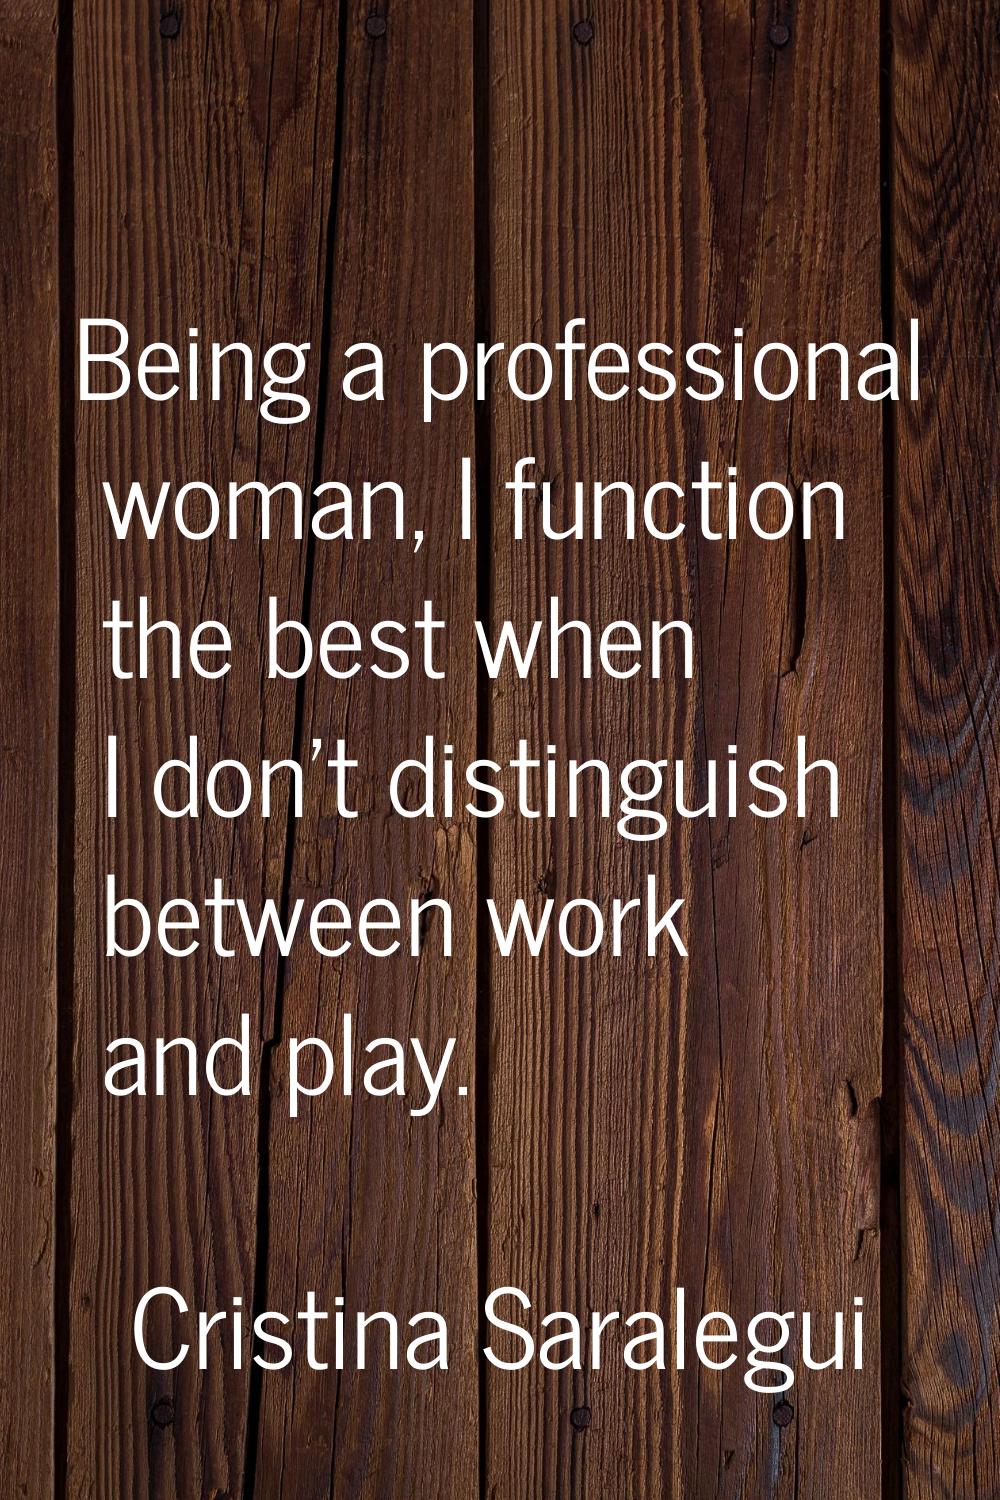 Being a professional woman, I function the best when I don't distinguish between work and play.